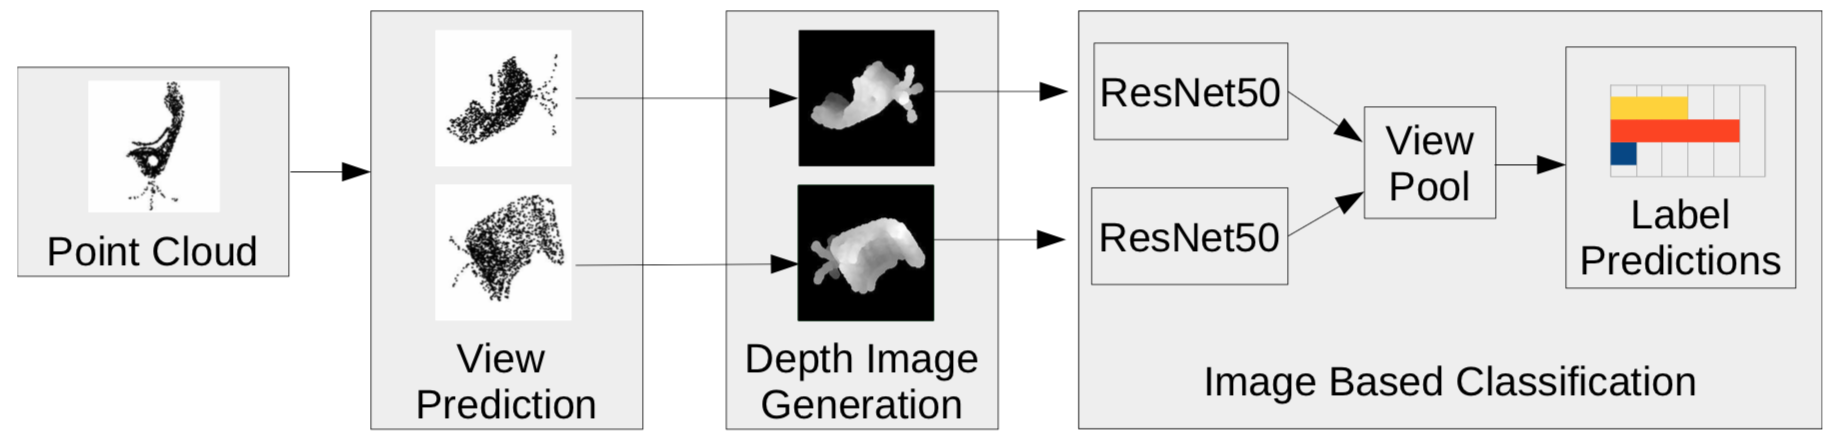 fukuhara-A-Network-Architecture-for-Point-Cloud-Classification-via-Automatic-Depth-Images-Generation.png